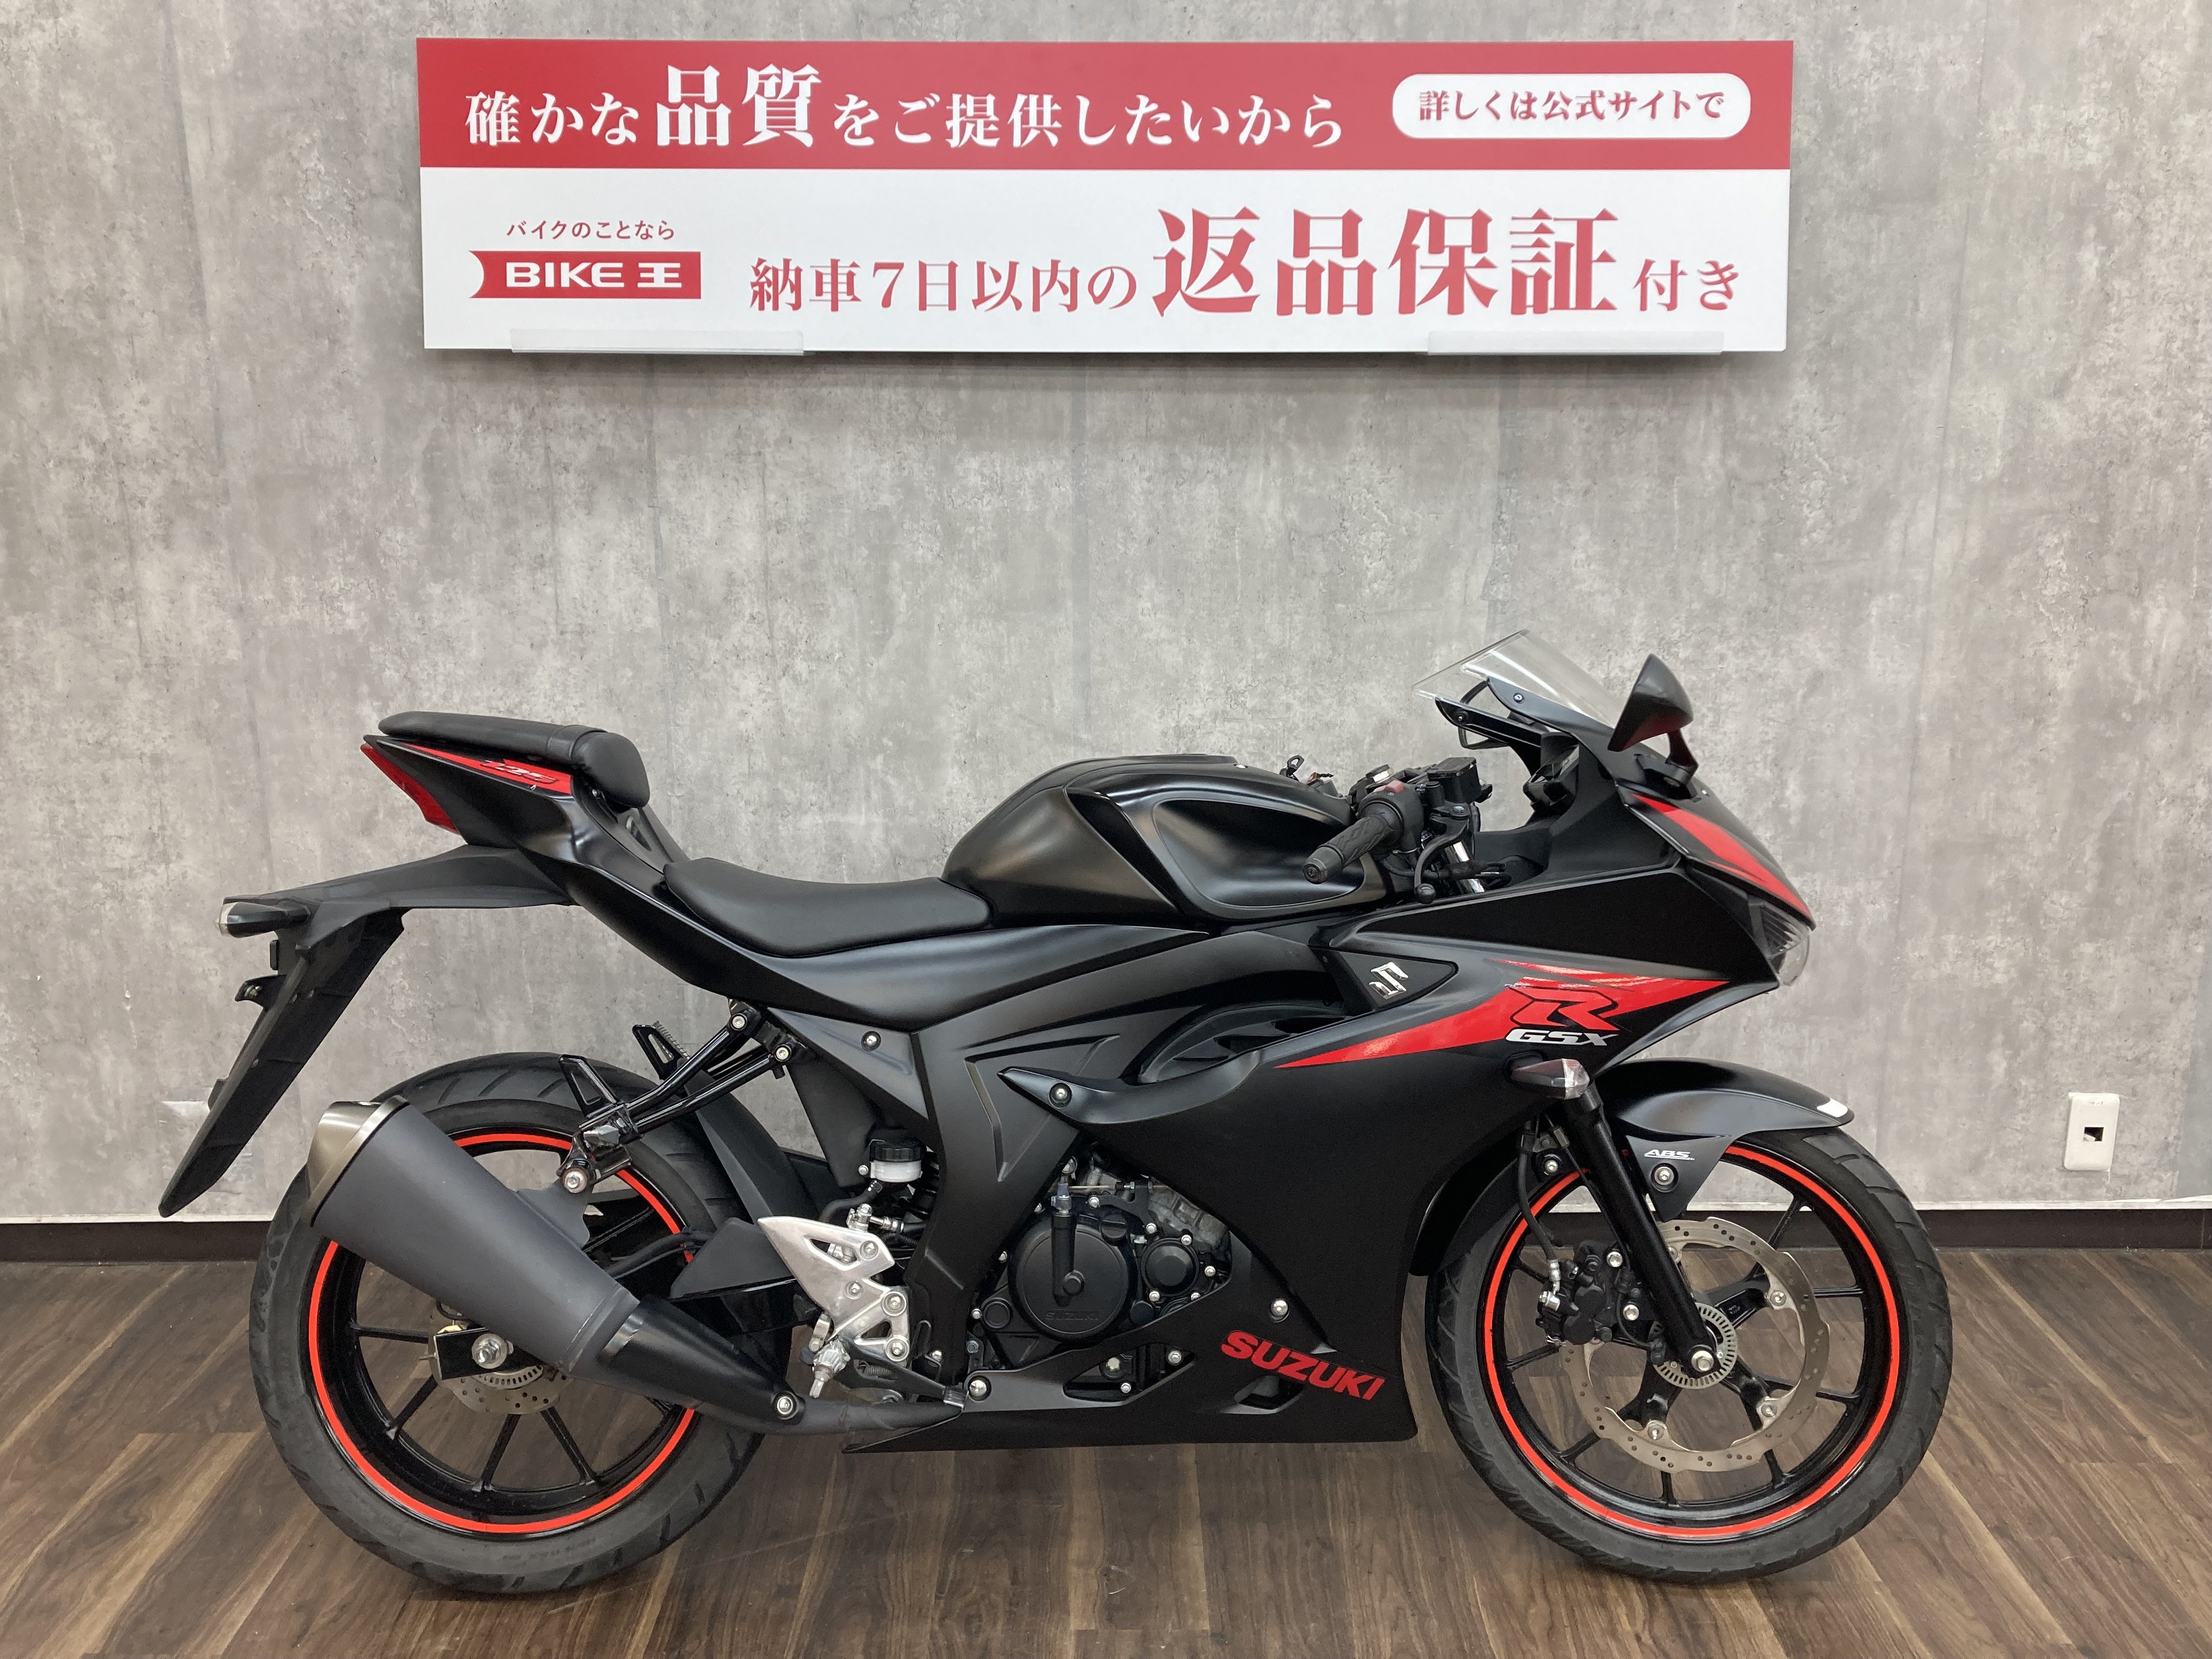 GSX-R125 ABS ☆2018年モデル☆！! | バイク買うなら【バイク王】